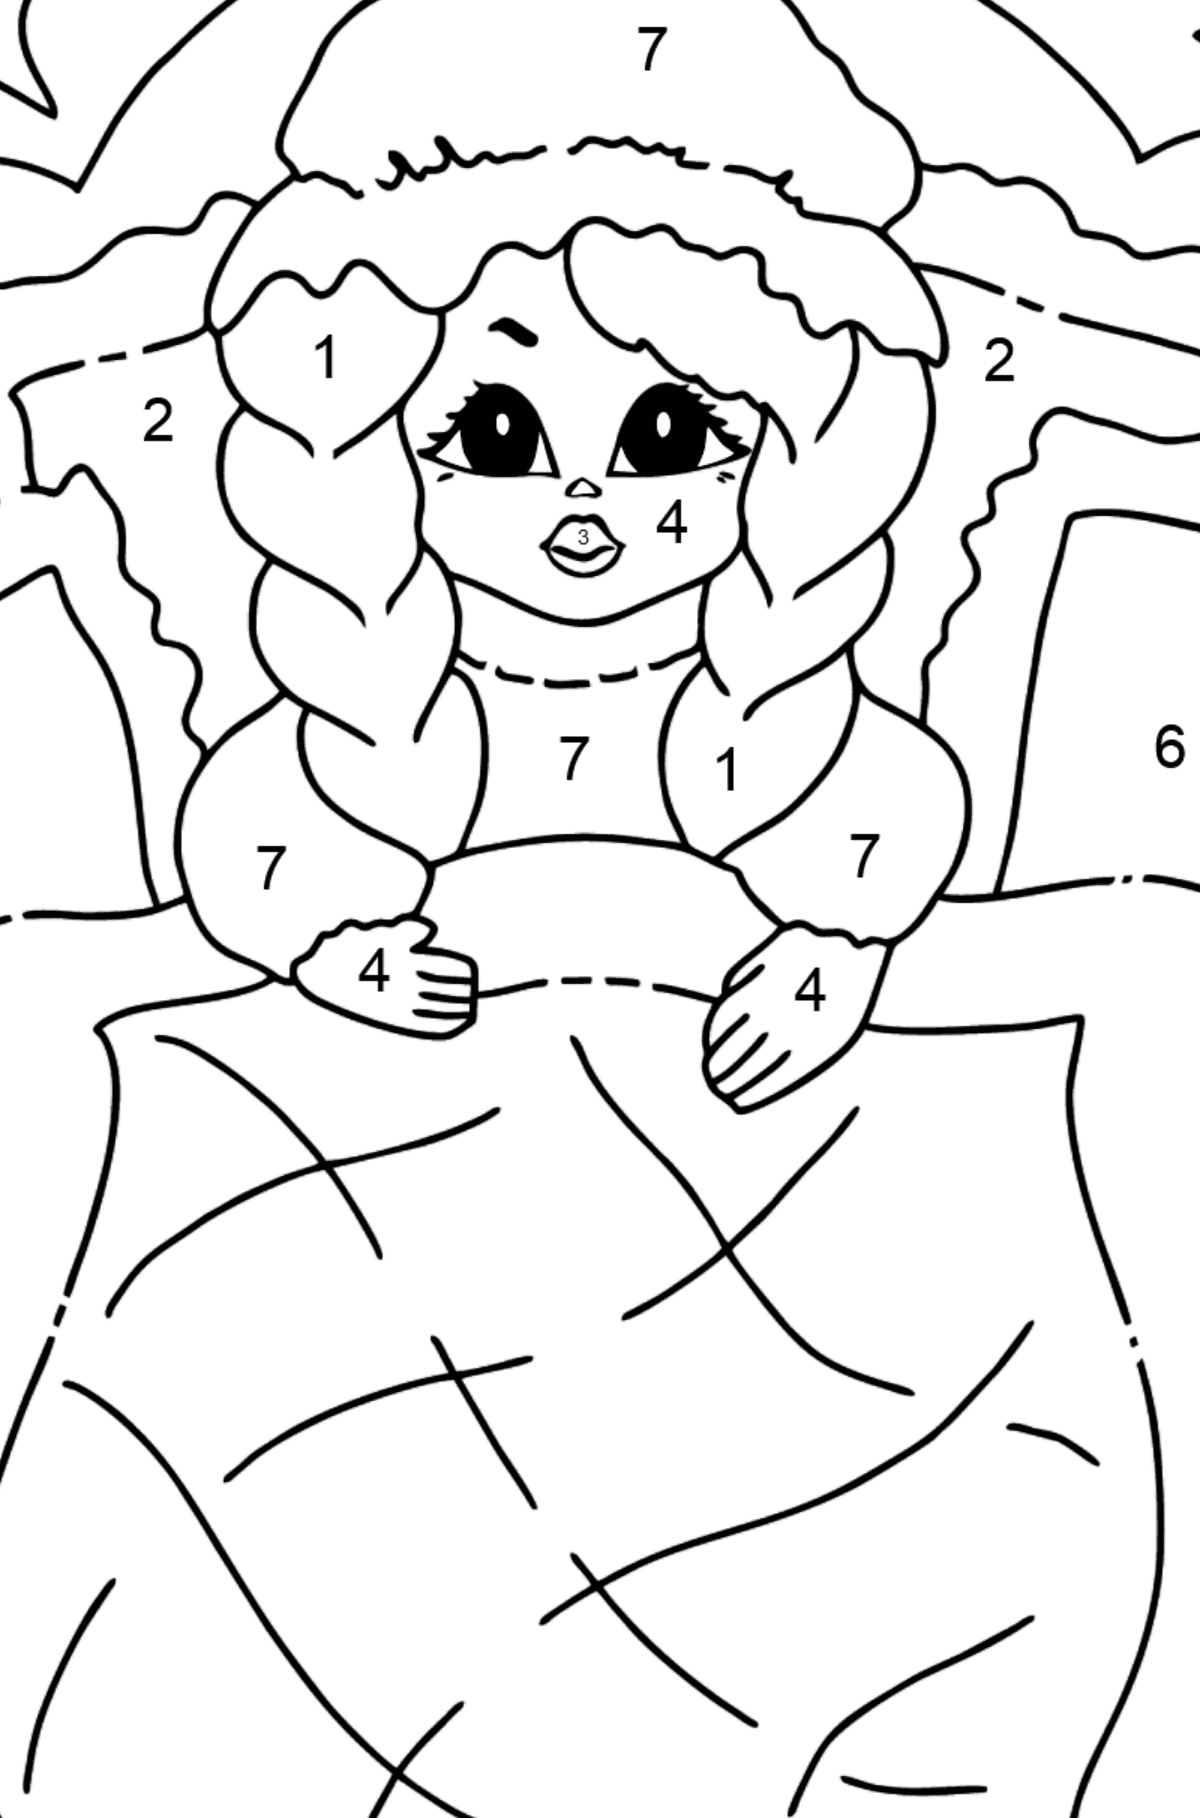 Coloring Picture - A Princess in Bed - Coloring by Numbers for Kids